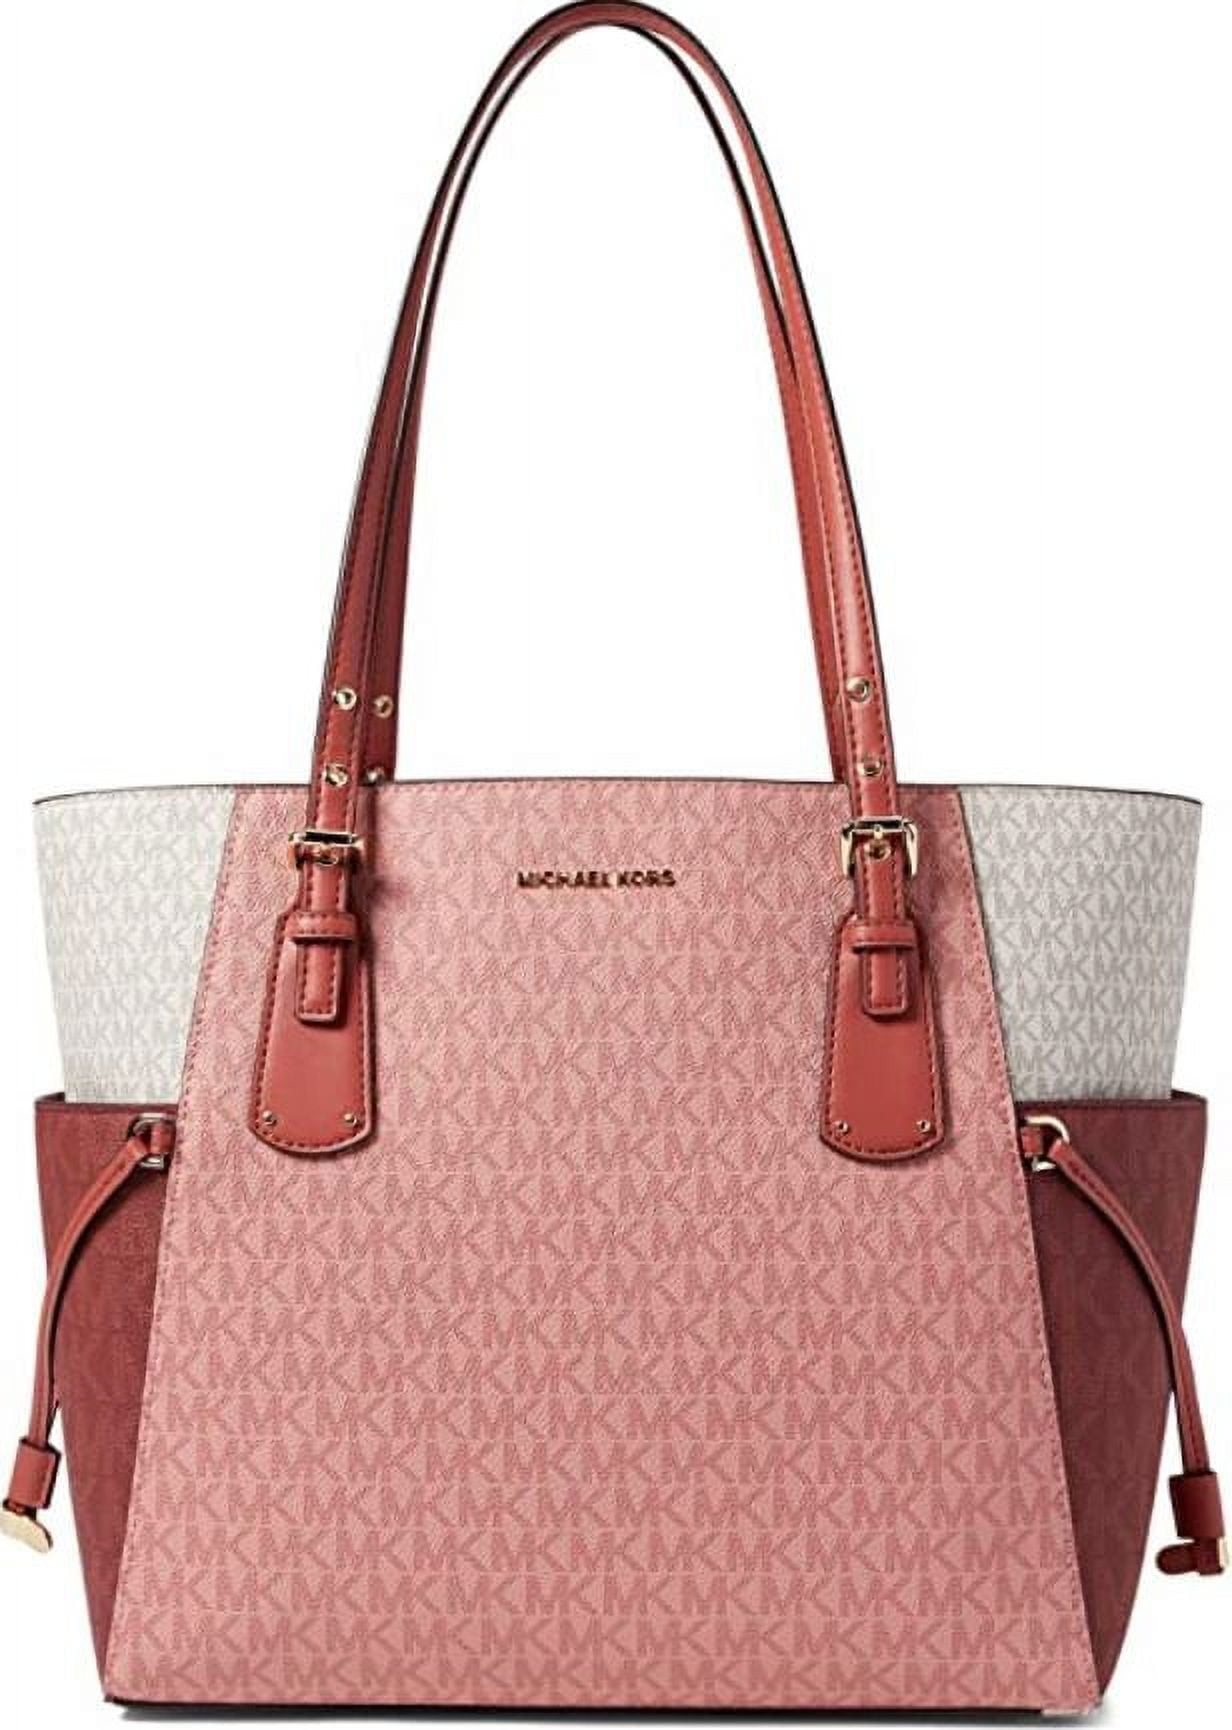 New Michael Kors voyager Medium crossgrain leather tote soft pink gold  tablet 191935076991